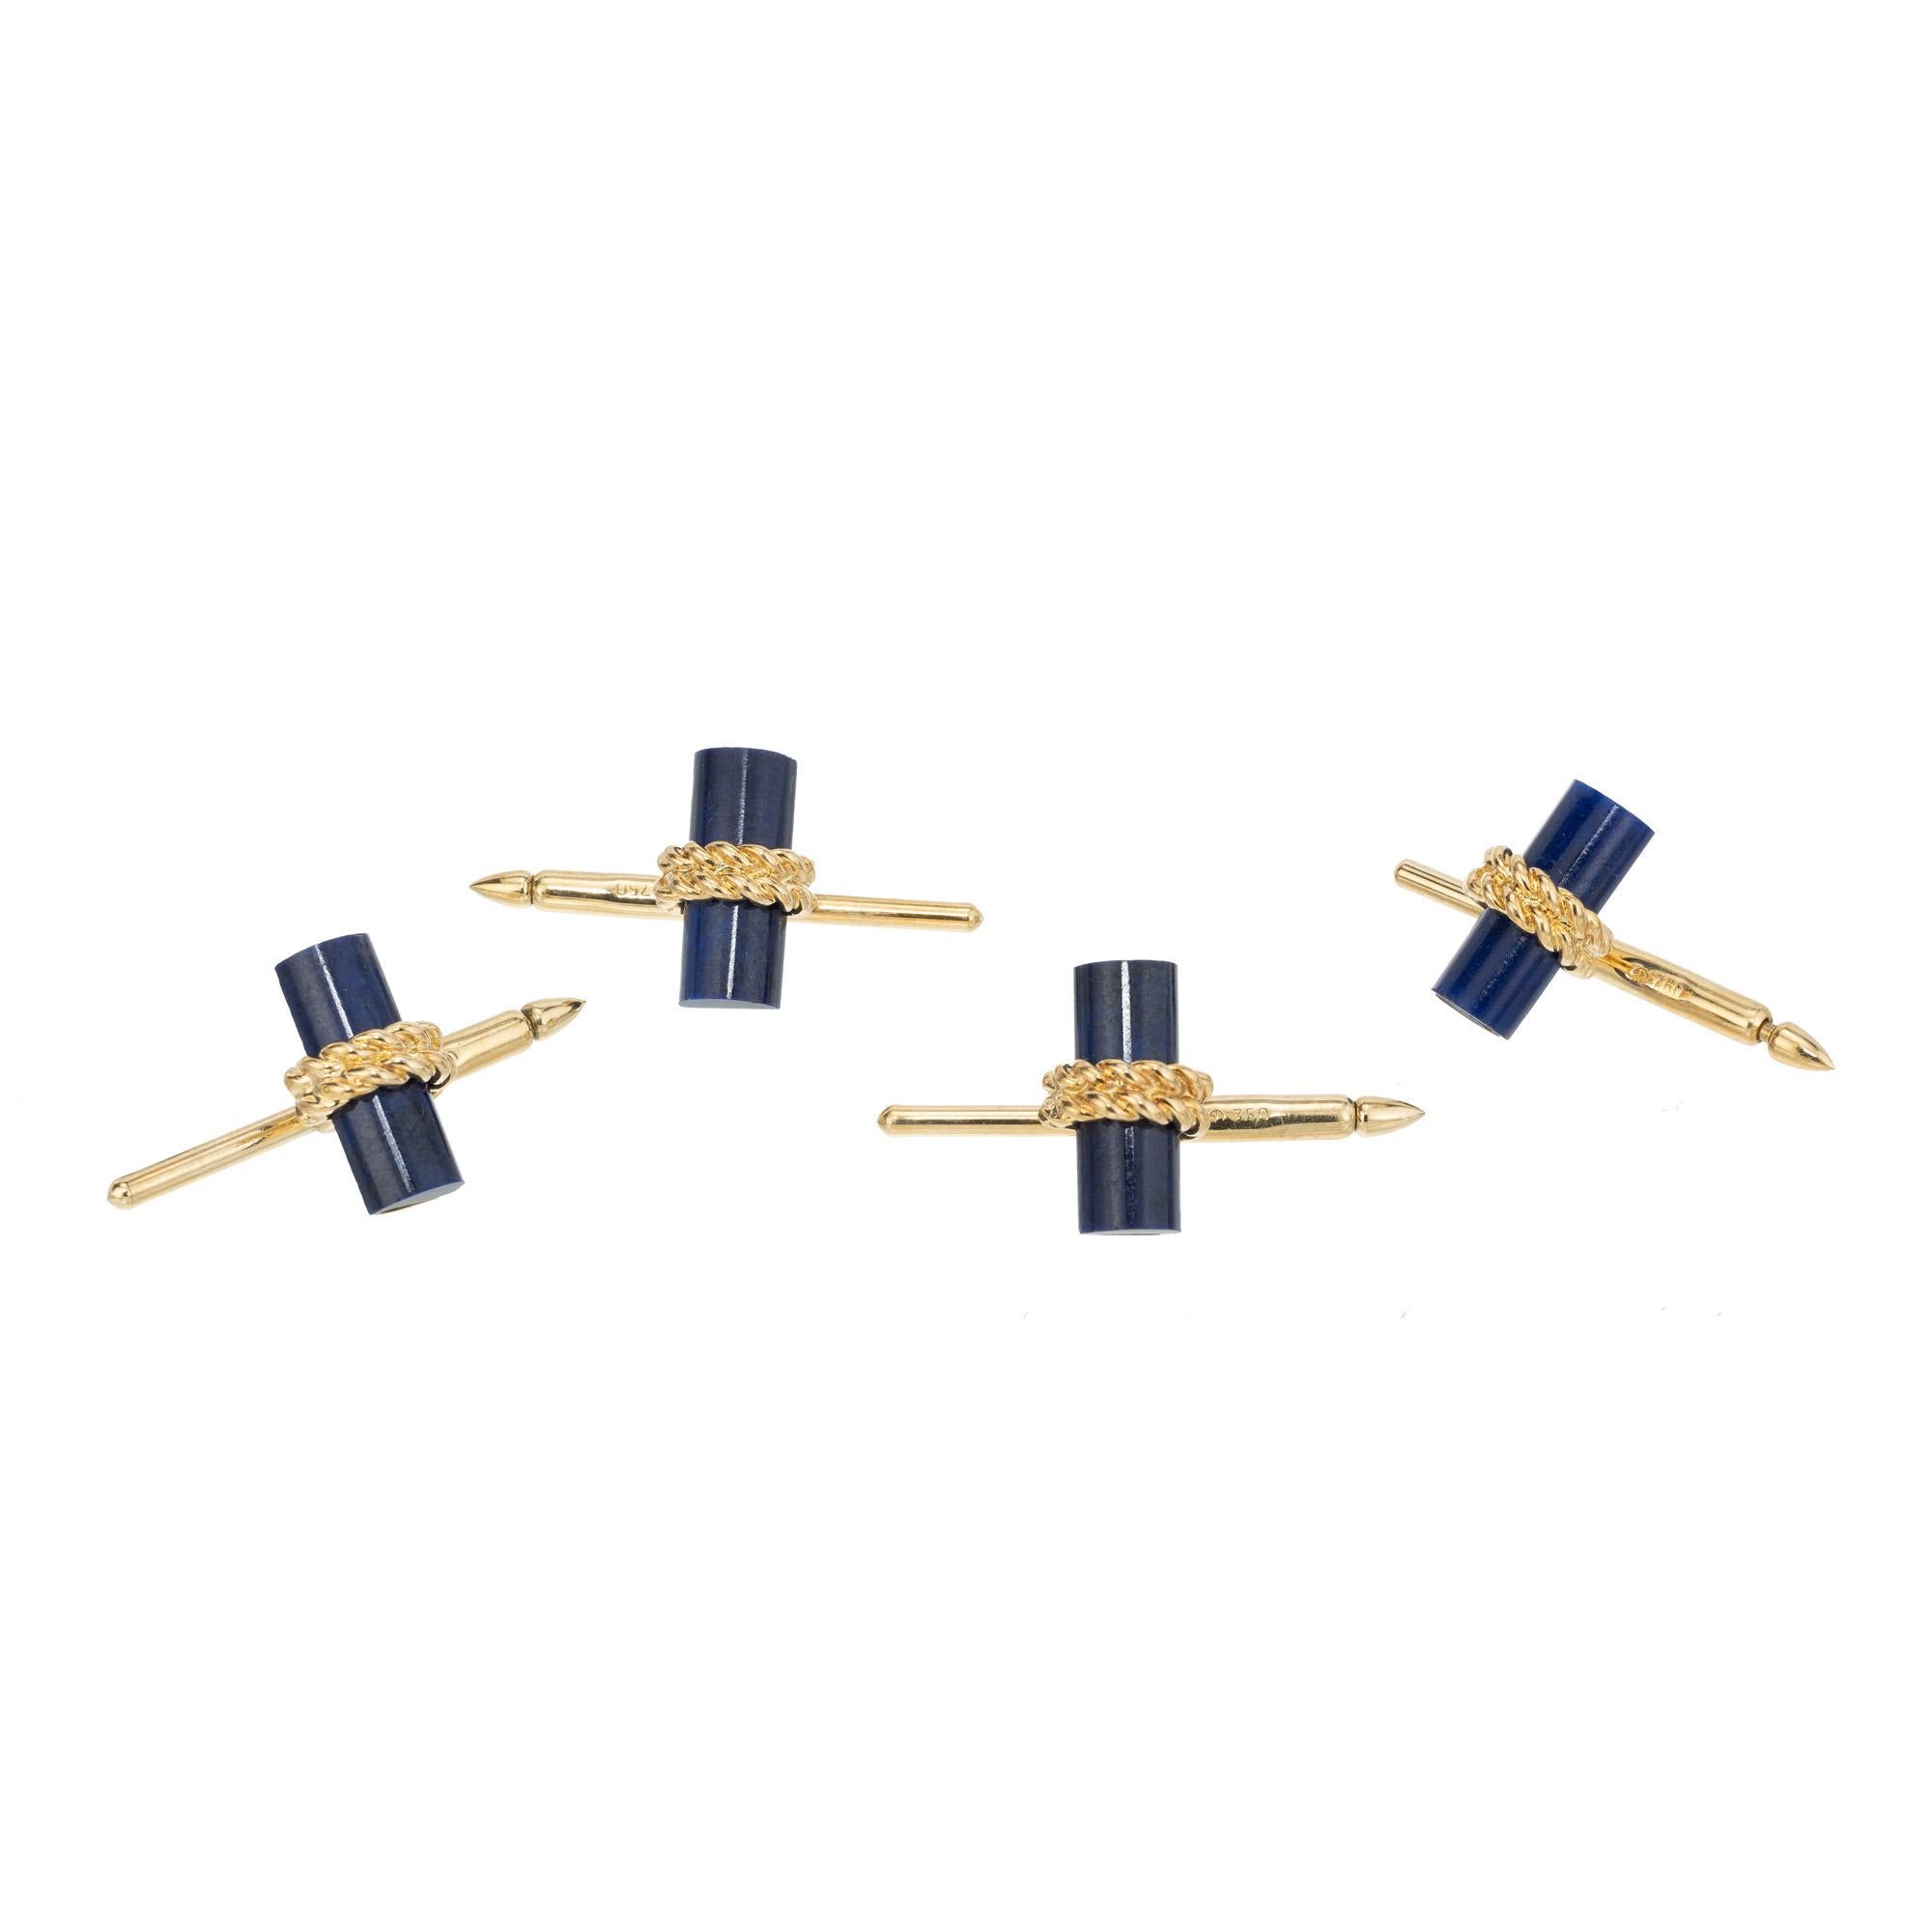 Four piece shirt stud set in lapis and 18k gold from Van Cleef and Arpels. Rare complete four piece set. Van Cleef and Arpels box included.

4 1/2 tubes blue lapis, 12.9 x 5.3 x 3 
18k yellow gold 
Stamped: 18k
Hallmark: VCA NY
9.4 grams
Top to